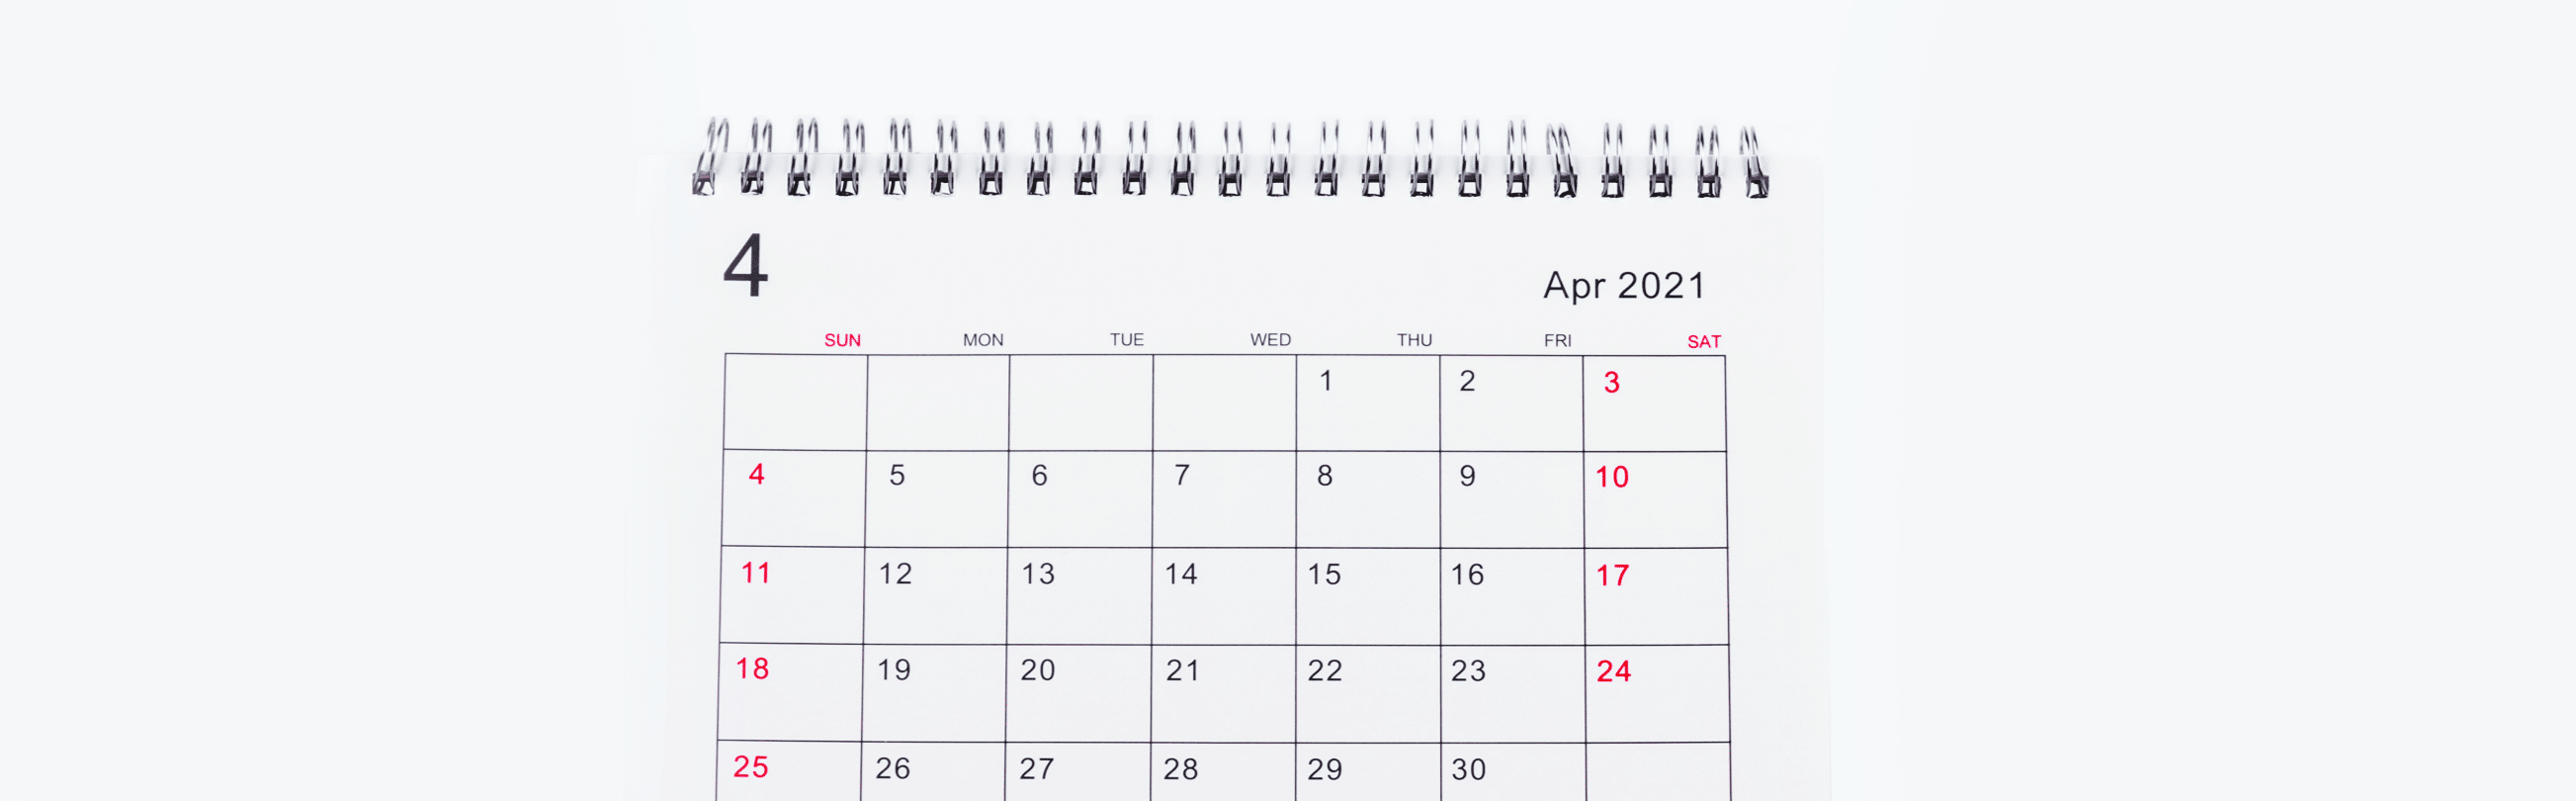 Best Practices for Creating a Well-Designed Content Calendar - Astute Communications